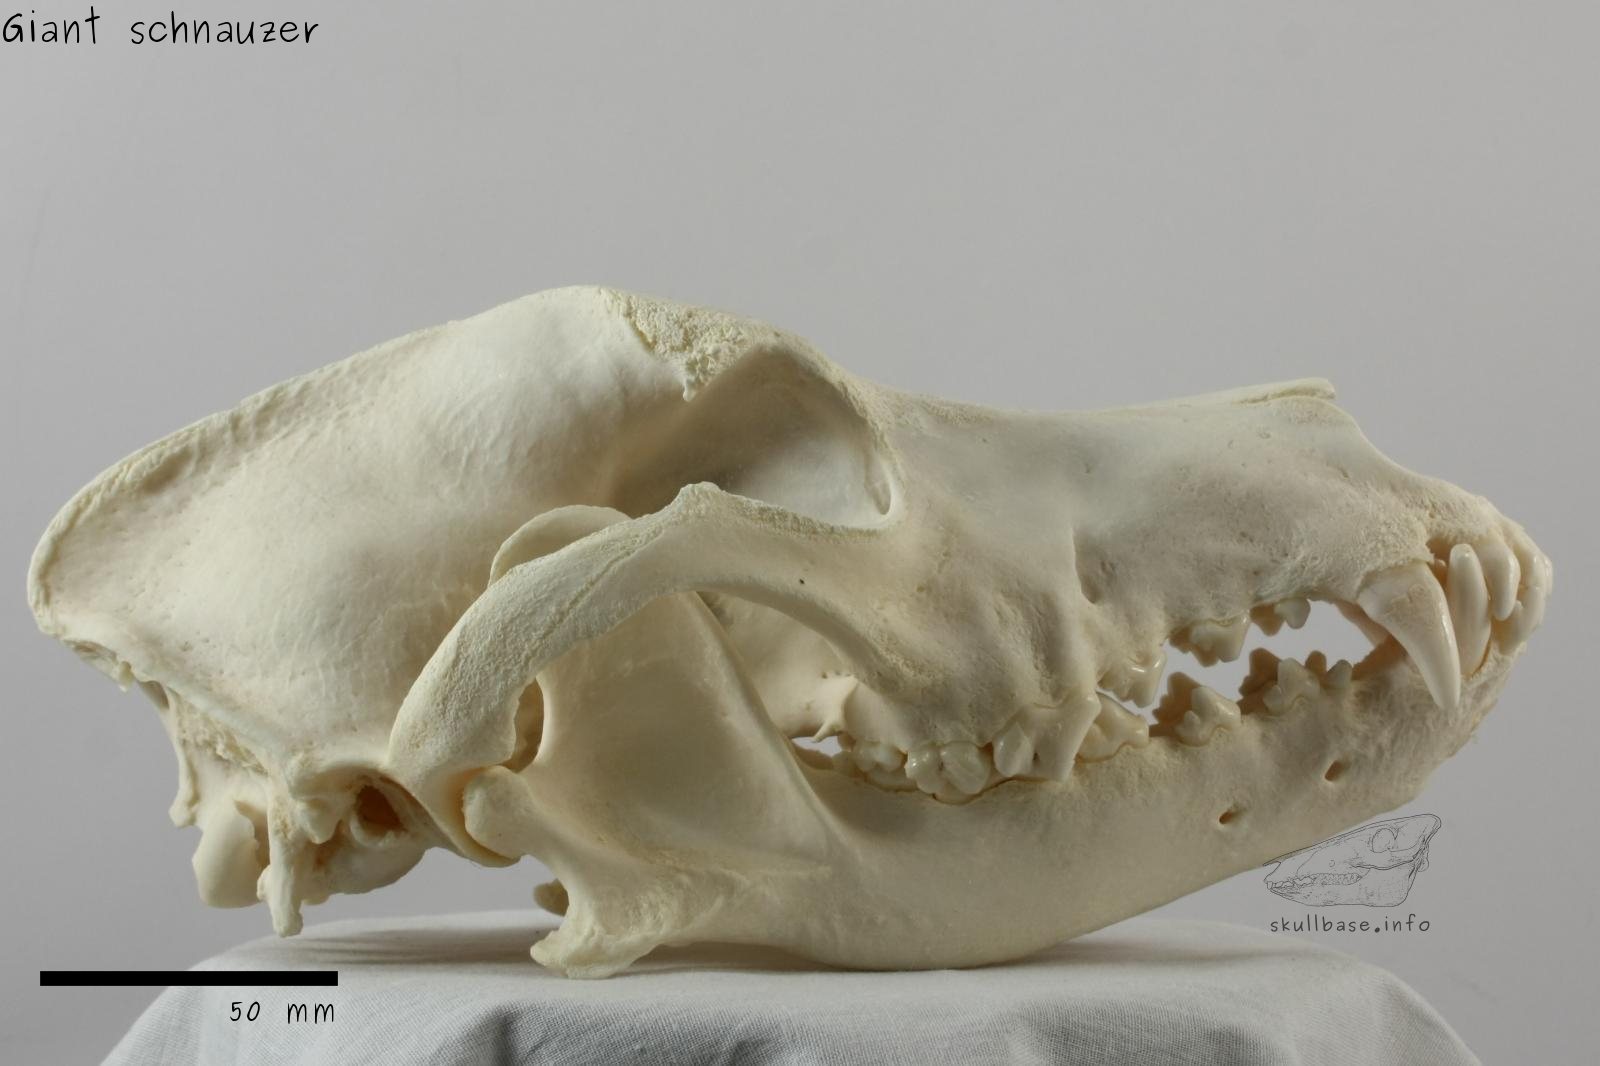 Giant schnauzer (Canis lupus familiaris) skull lateral view